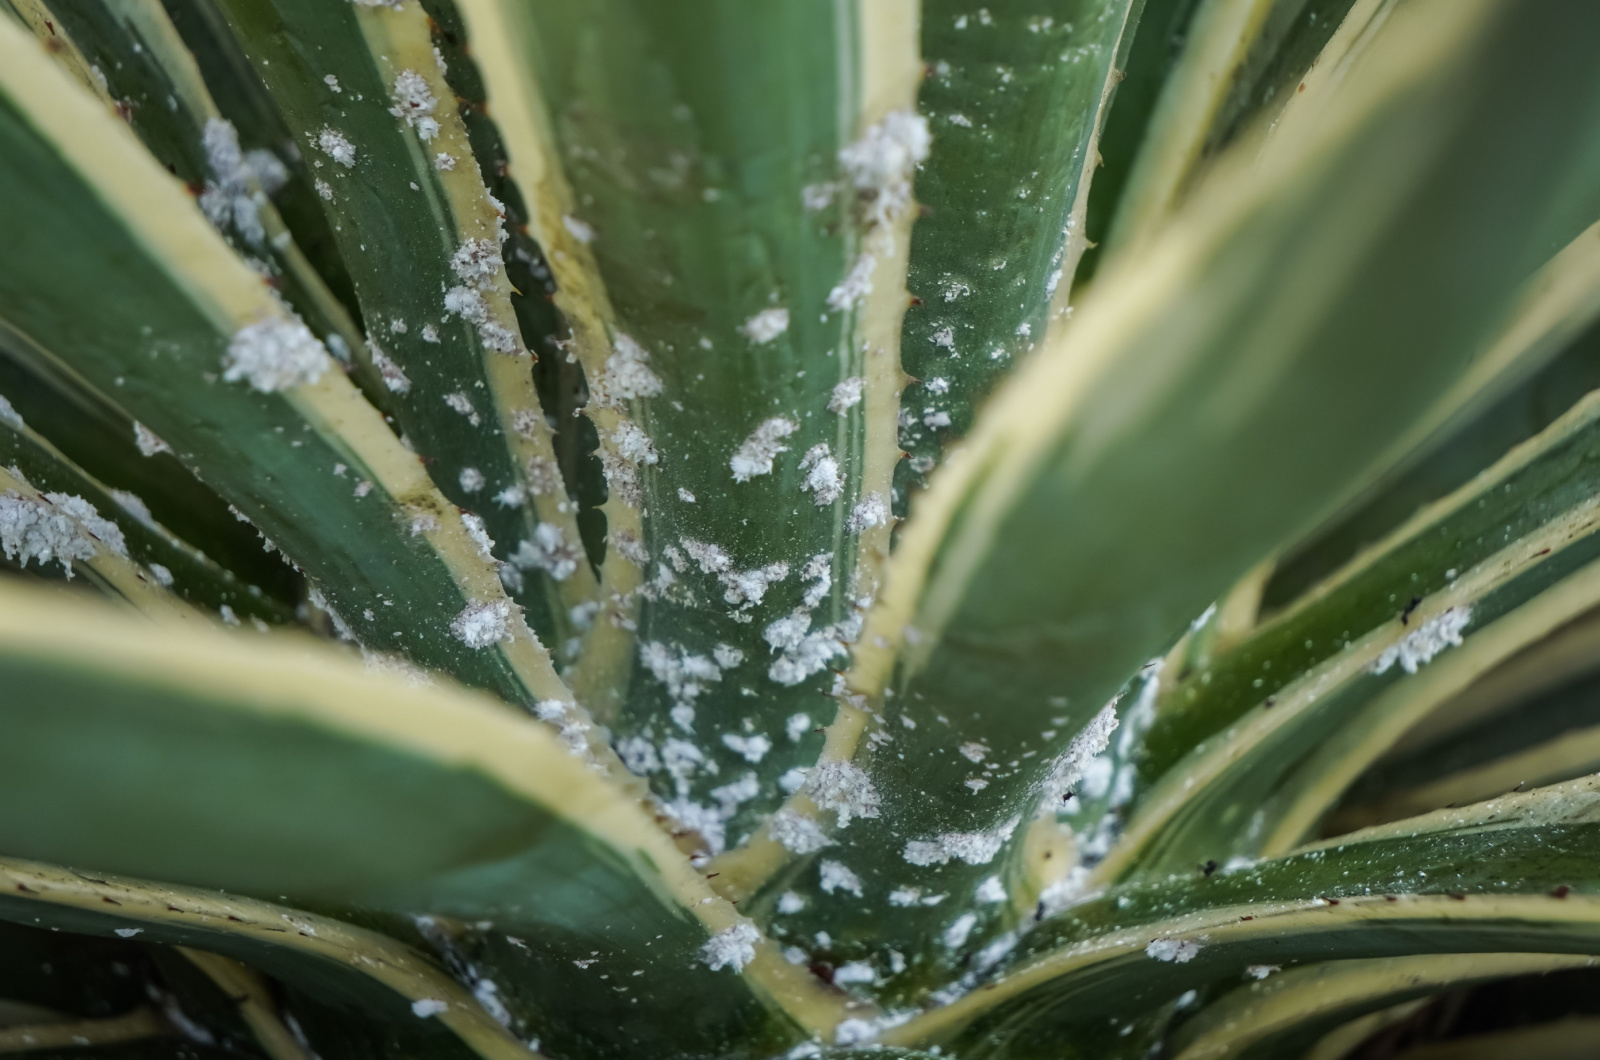 Pests on agave